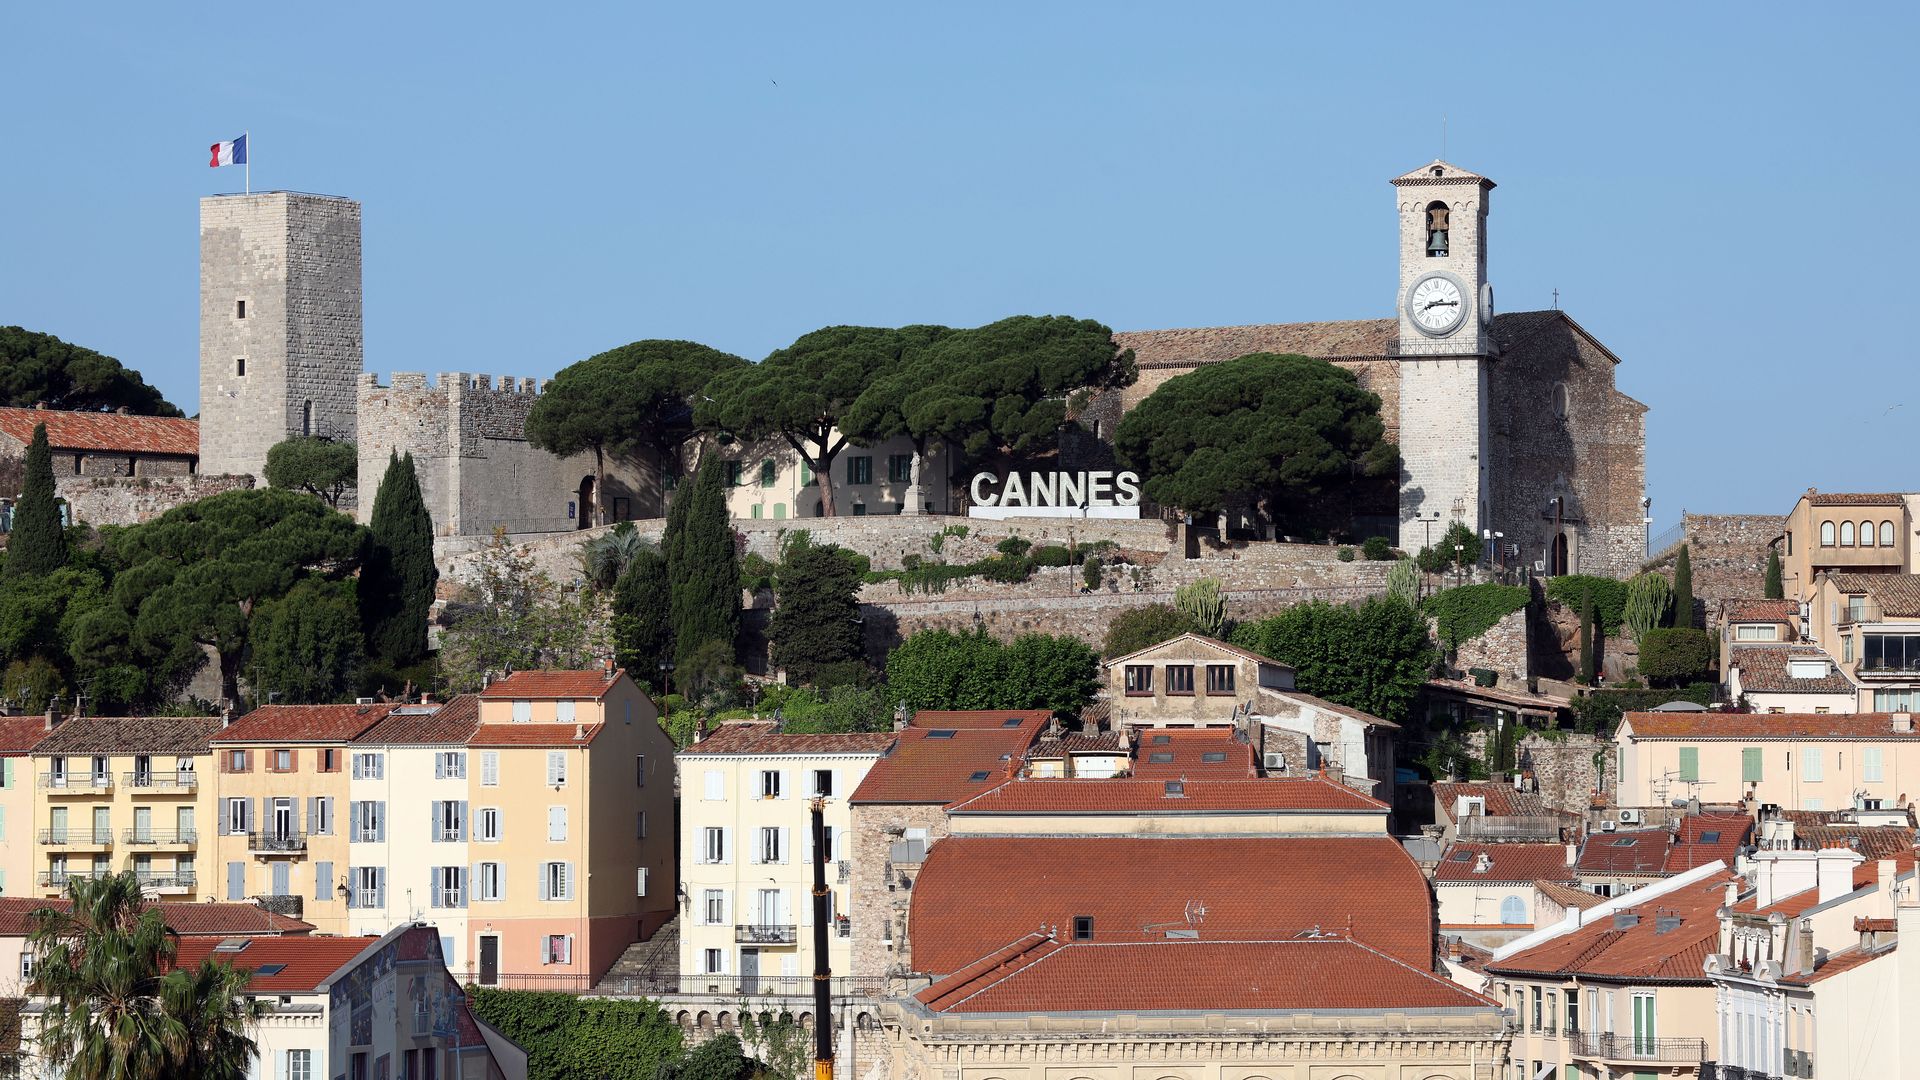 A view of some historic buildings in Cannes